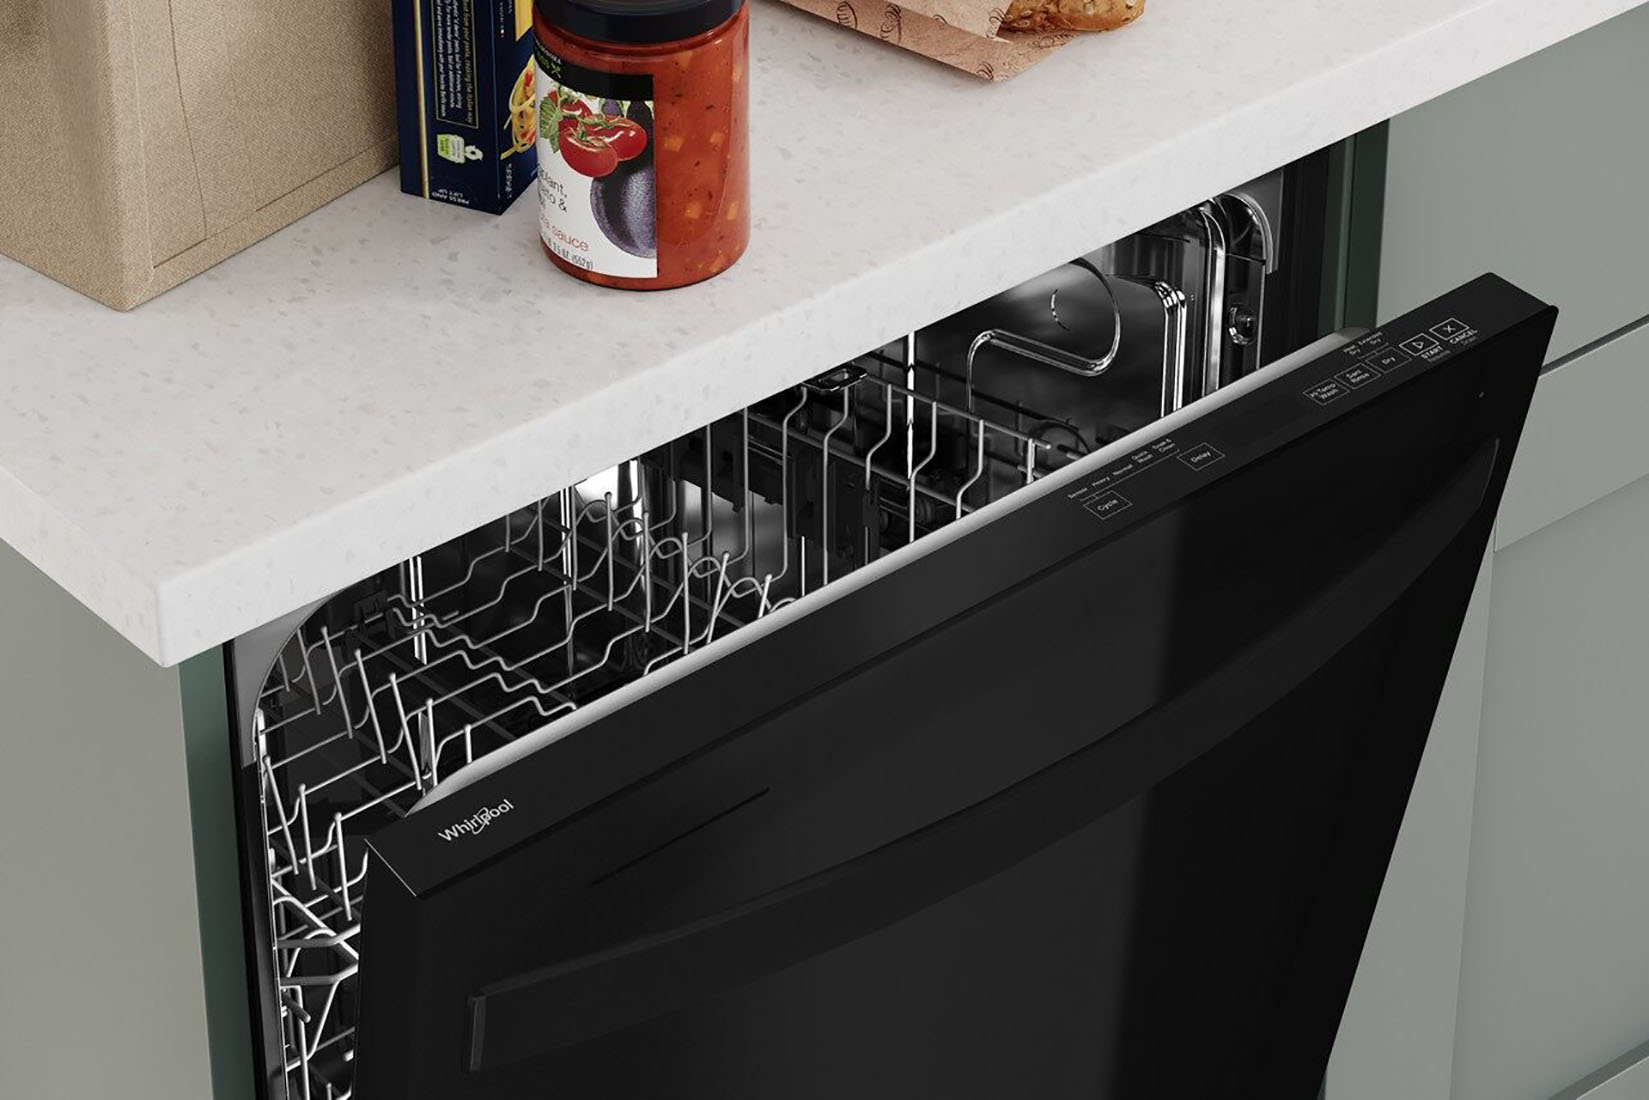 Whirlpool Top Control 24-in Built-In Dishwasher With Third Rack  (Fingerprint Resistant Metallic Steel), 47-dBA in the Built-In Dishwashers  department at